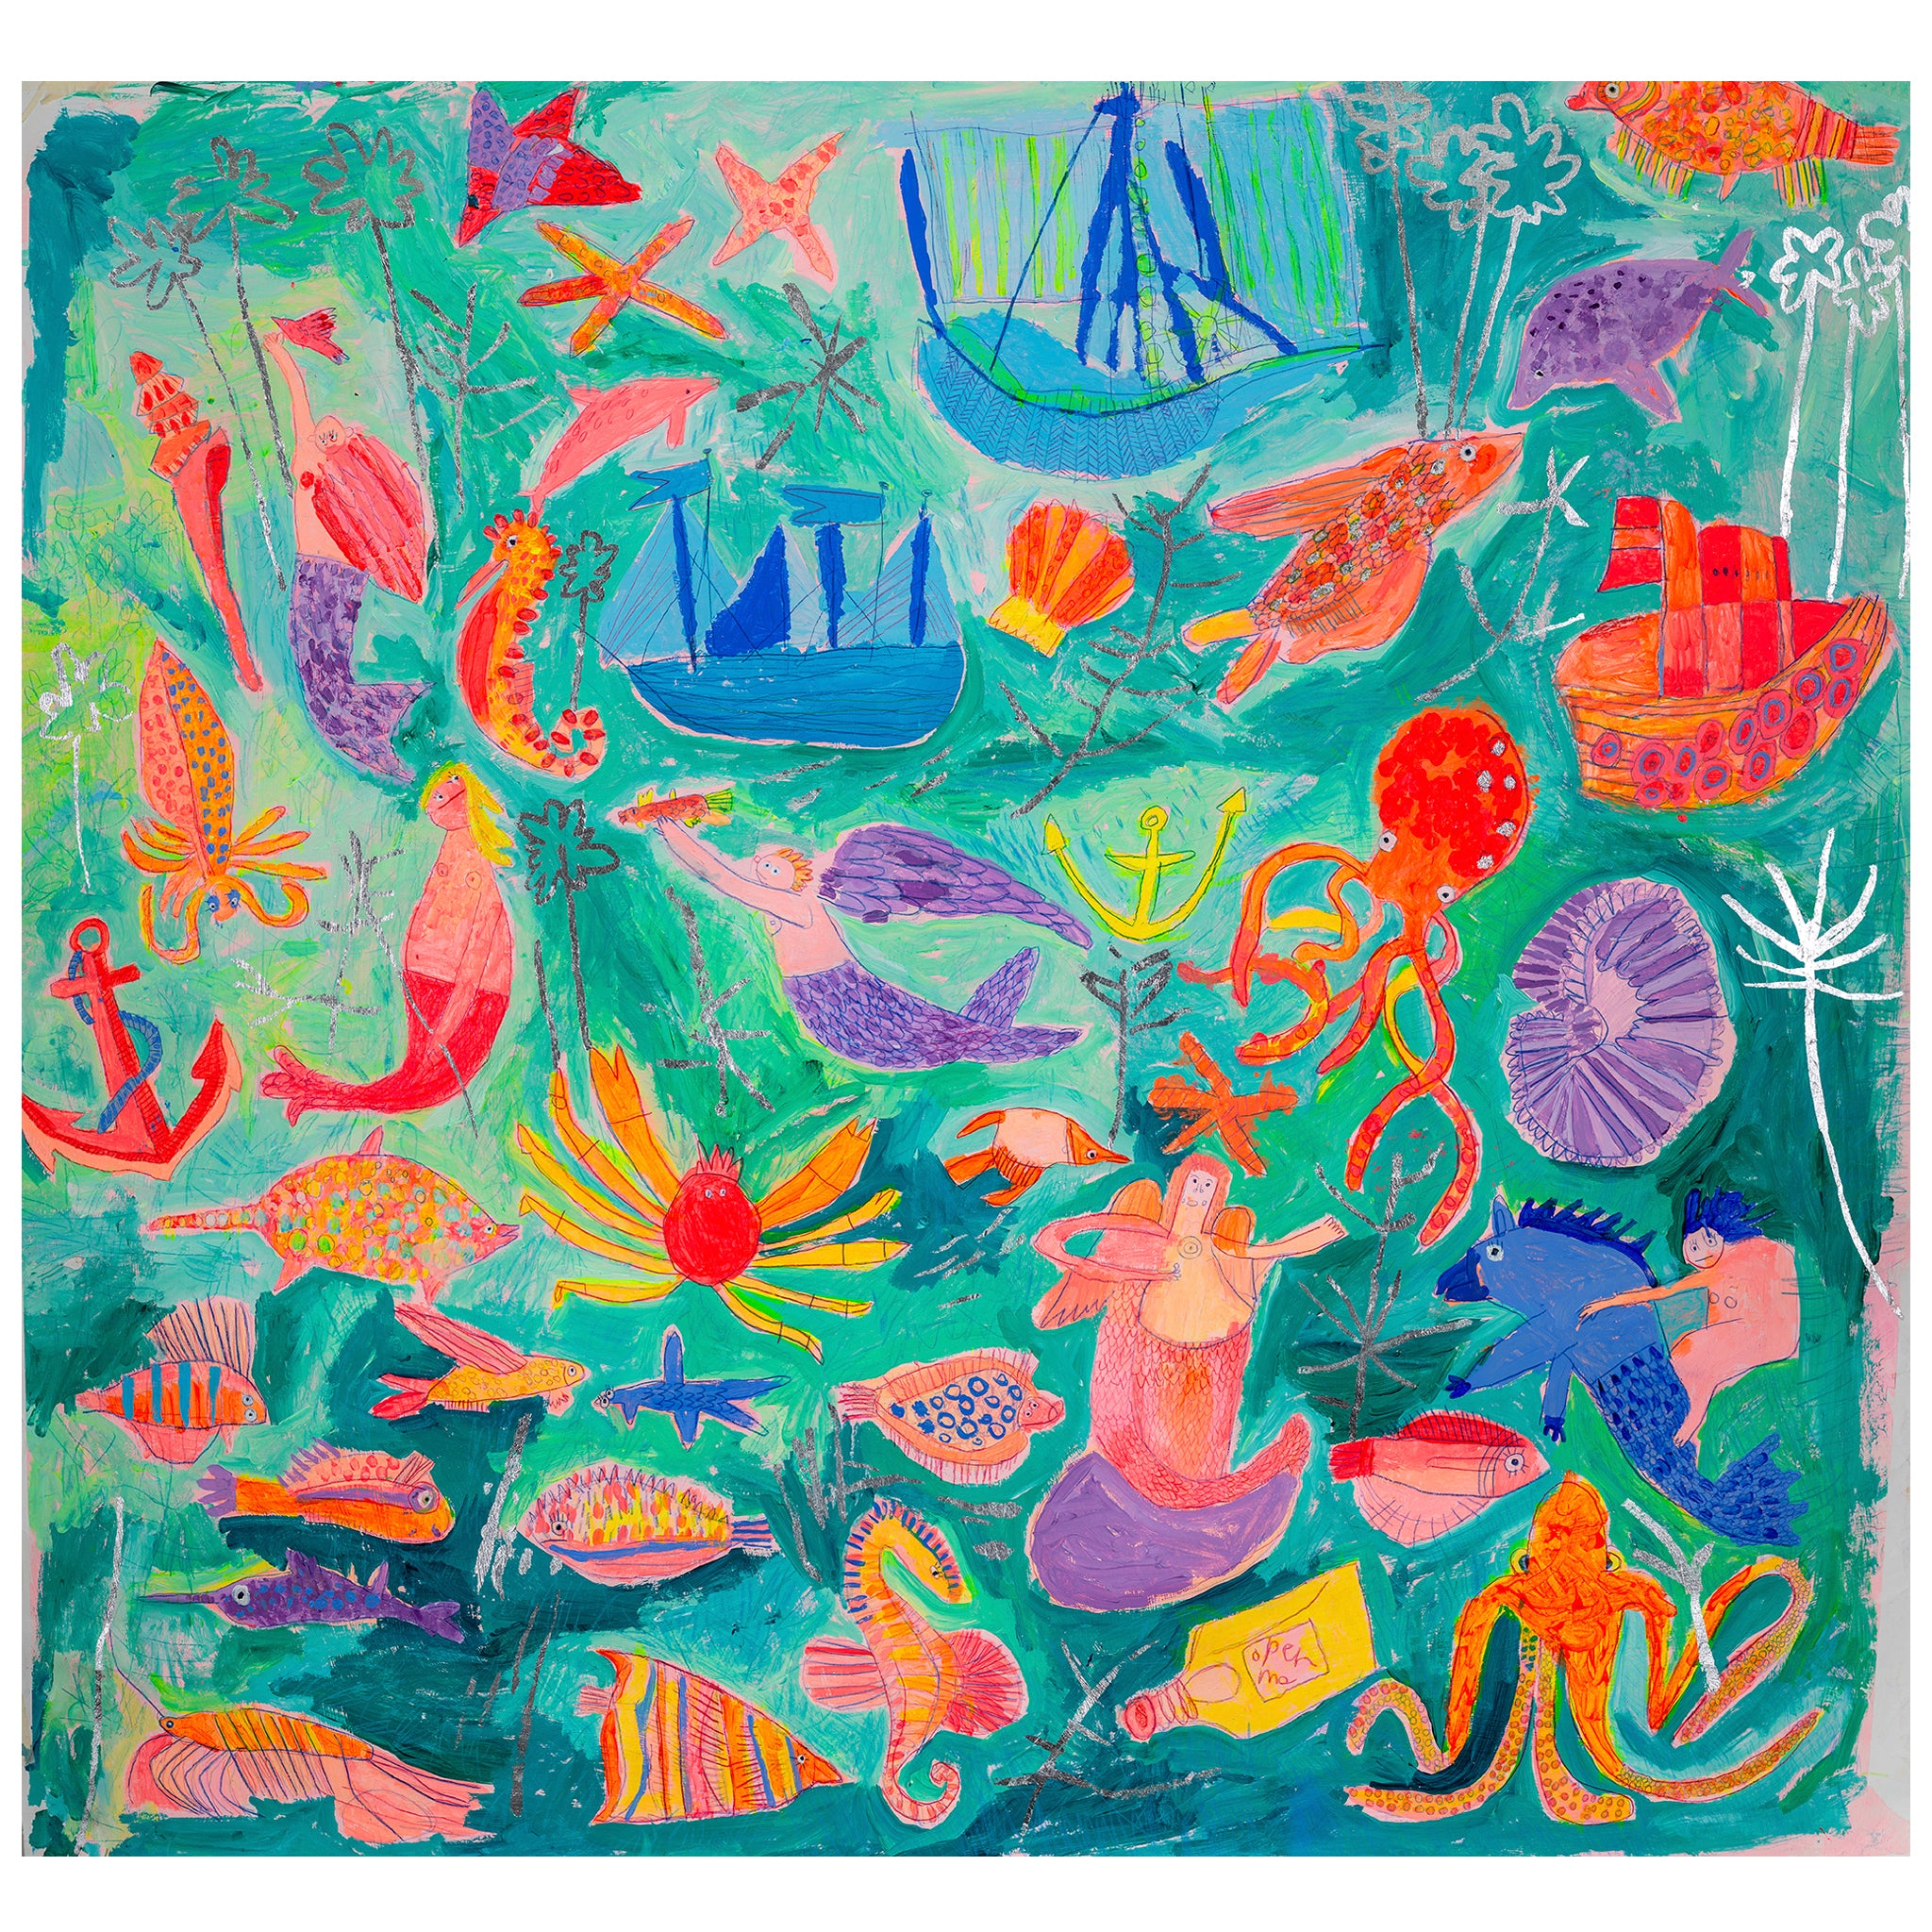 Large bright coloured painting of mermaids, ships and underwater creatures in blues, oranges and pinks 